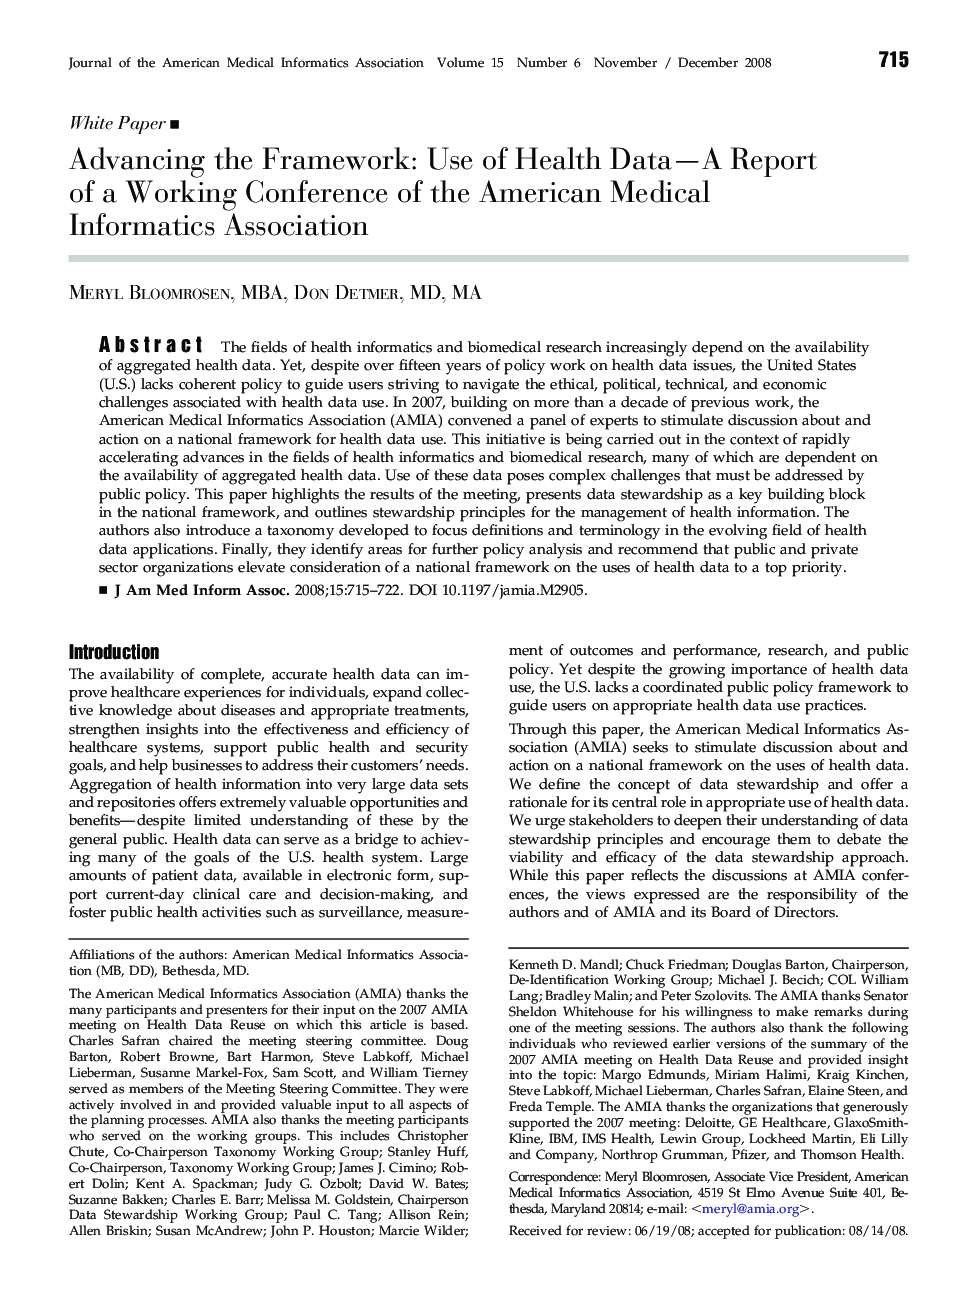 Advancing the Framework: Use of Health Data-A Report of a Working Conference of the American Medical Informatics Association